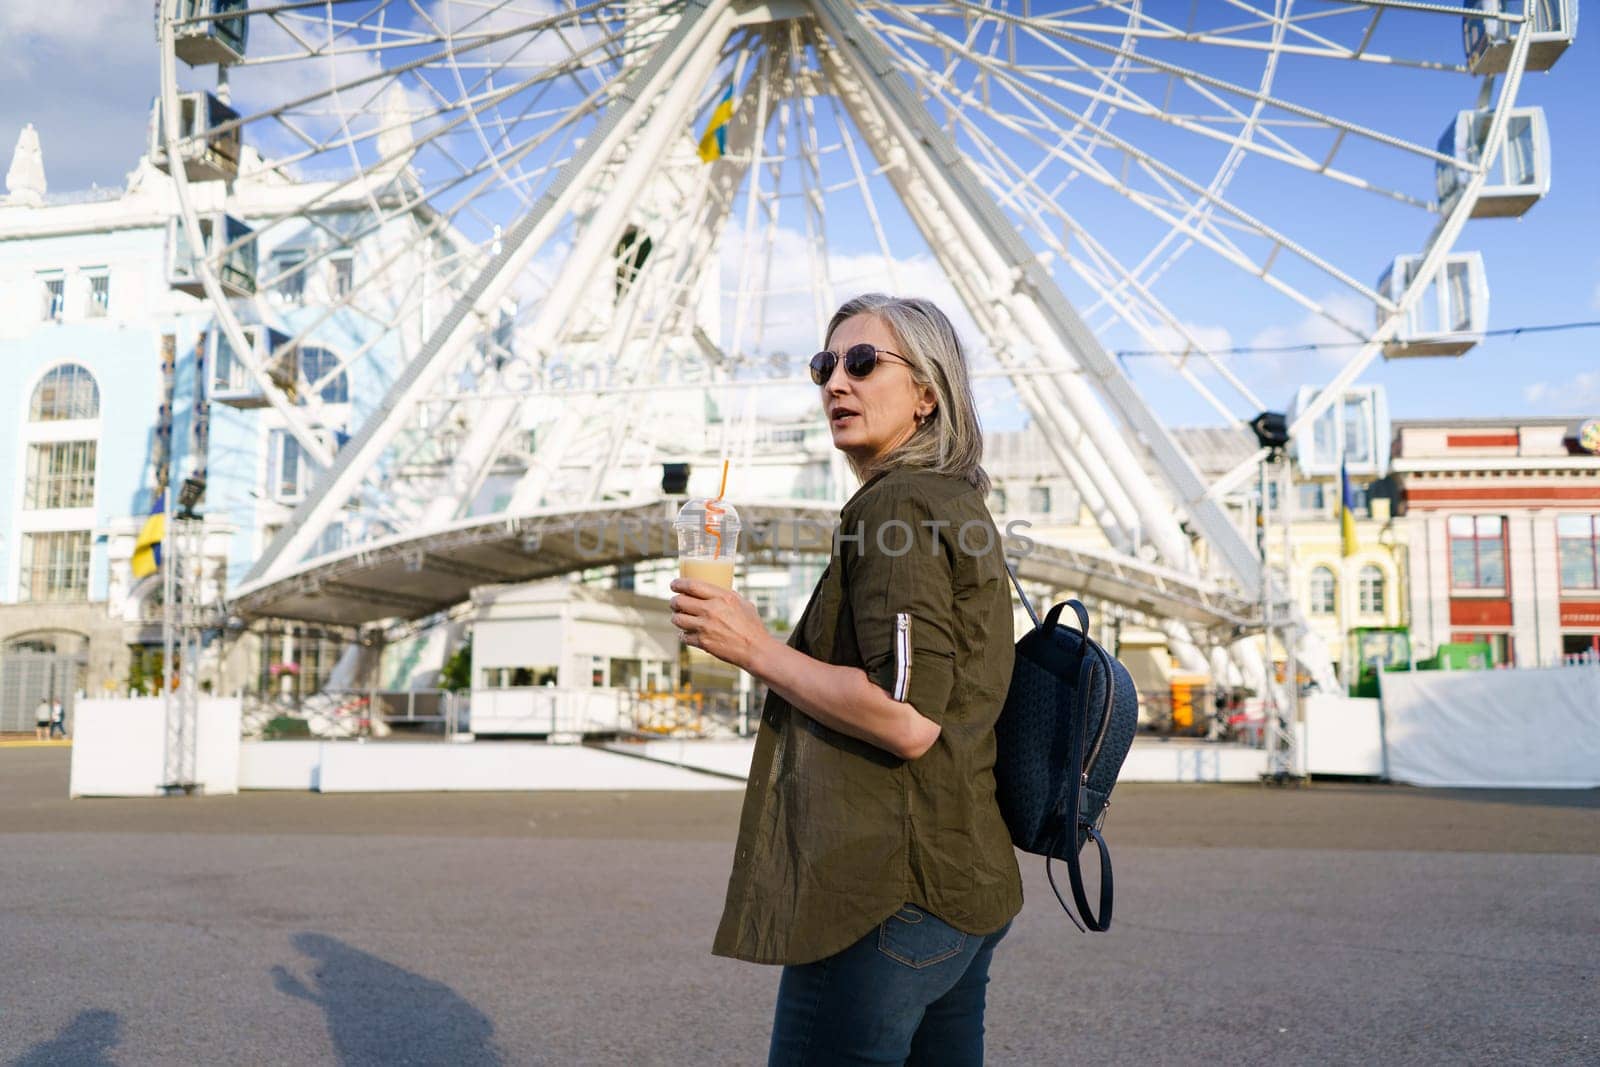 Stylish and confident mature woman with grey hair enjoys refreshing juice cup in vibrant European city, exuding elegance and positivity. The image captures the joy and active lifestyle of mature woman who is still fashion-savvy and full of life. by LipikStockMedia